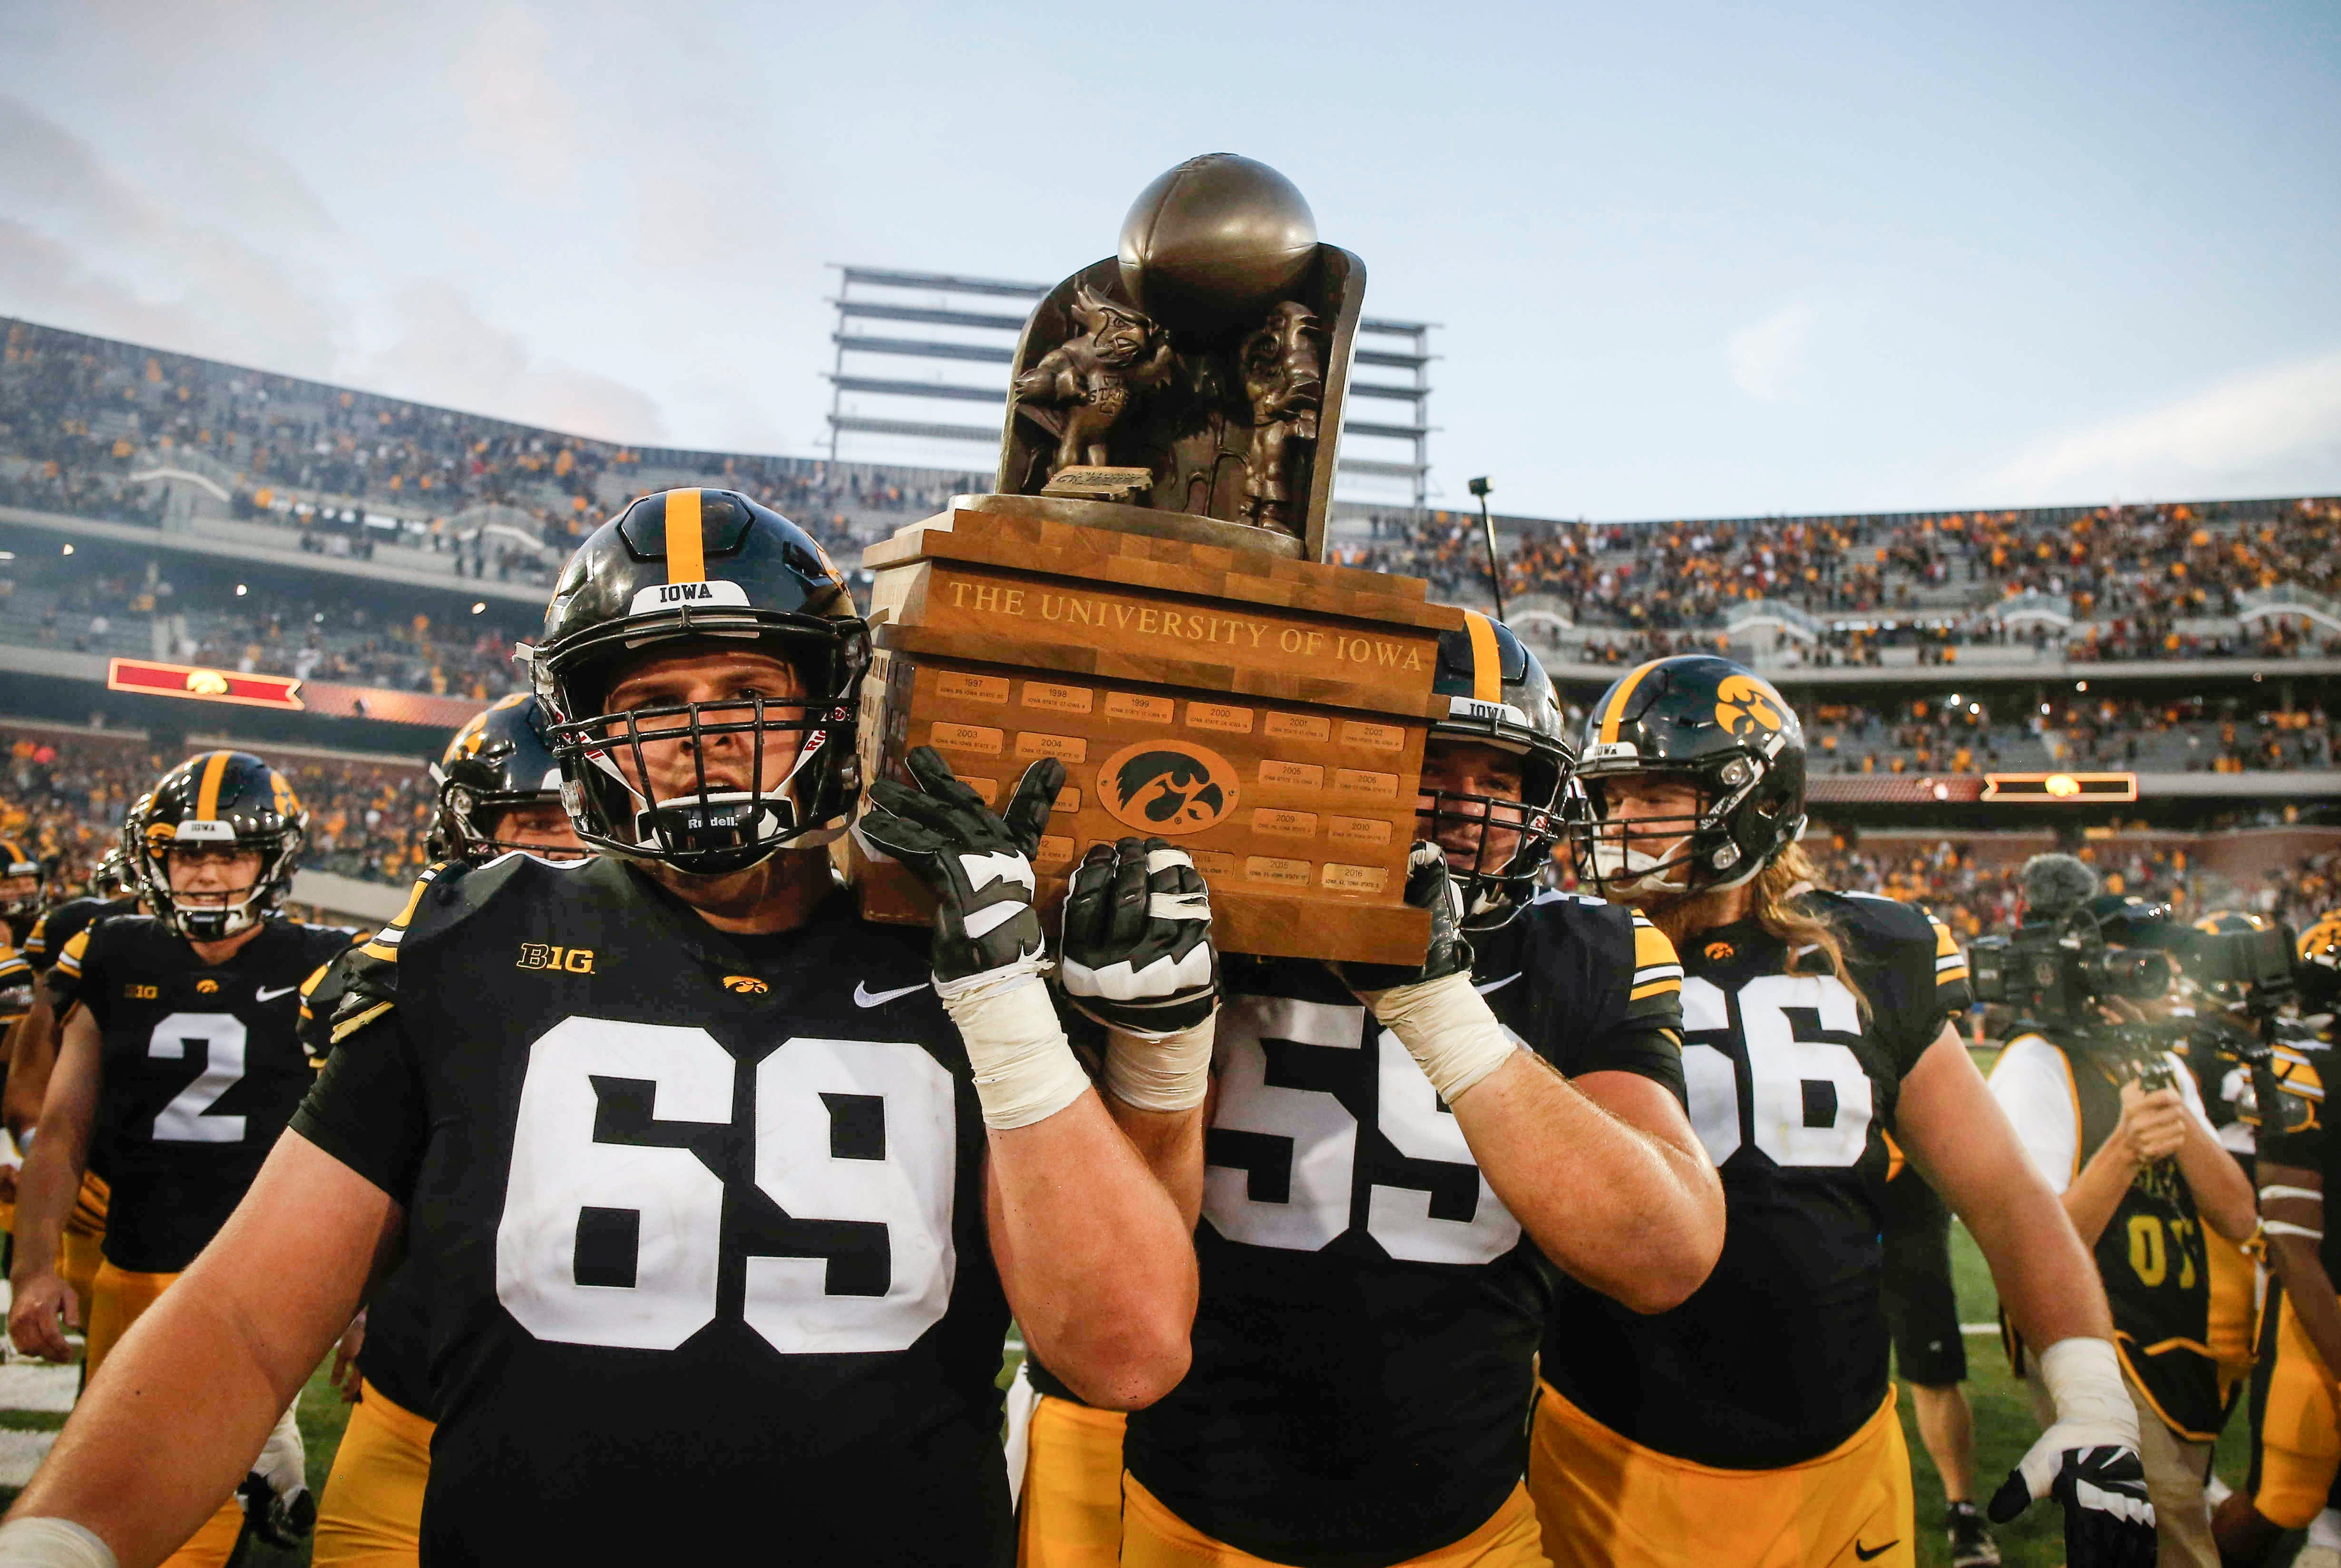 Members of the Iowa Hawkeyes football team carry the CyHawk trophy off the field after a 13-3 win over Iowa State on Saturday, Sept. 8, 2018, at Kinnick Stadium in Iowa City.